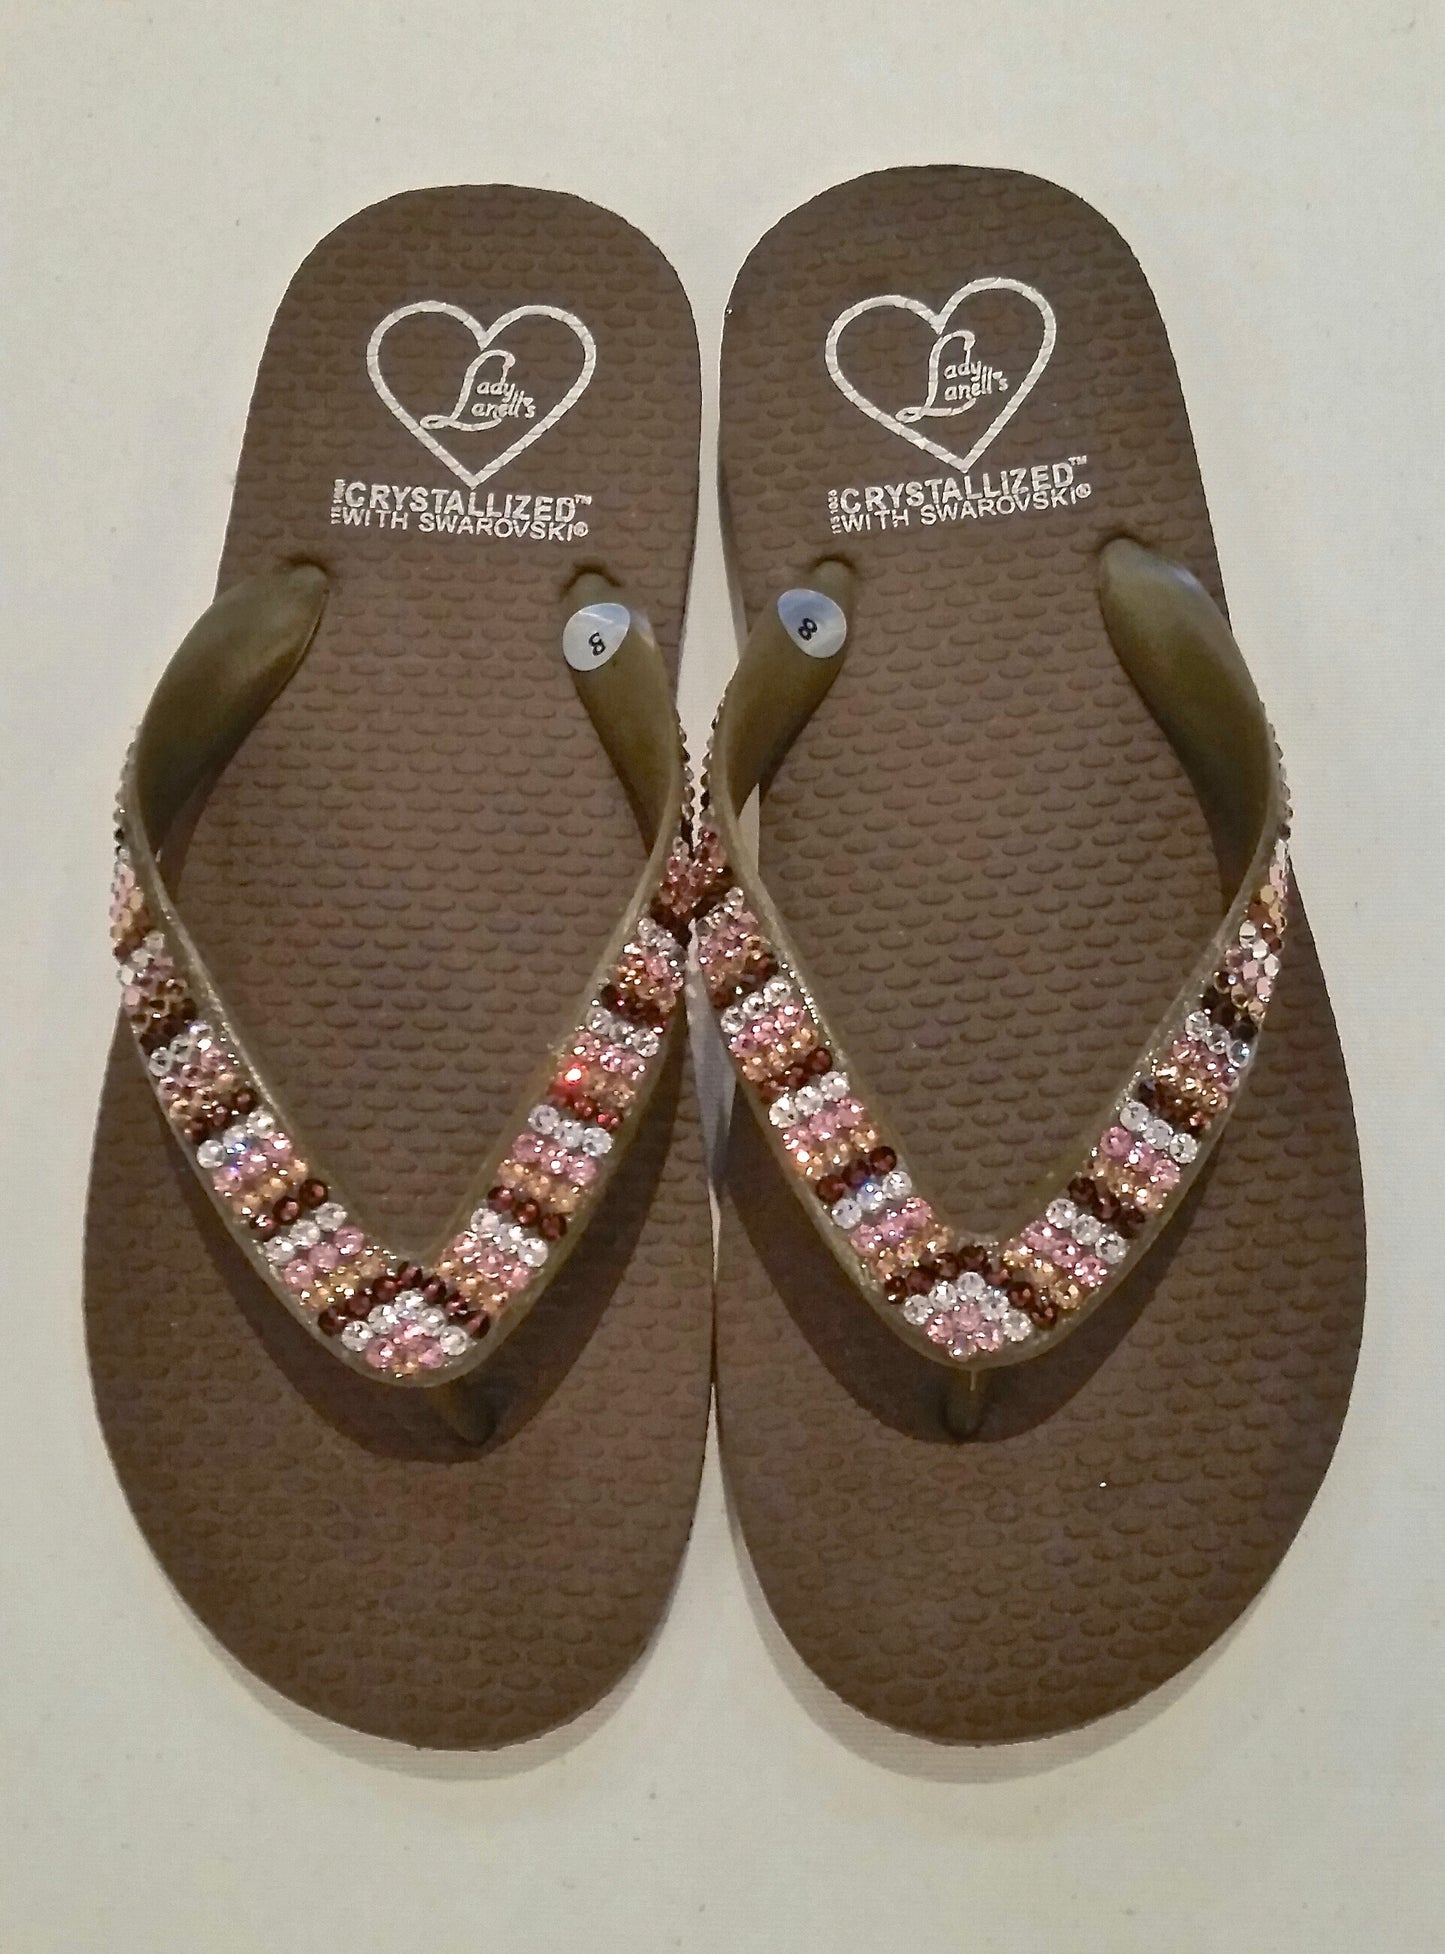 Flat Beach Sandal in Chocolate with pink, light colorado, smoke and clear crystals